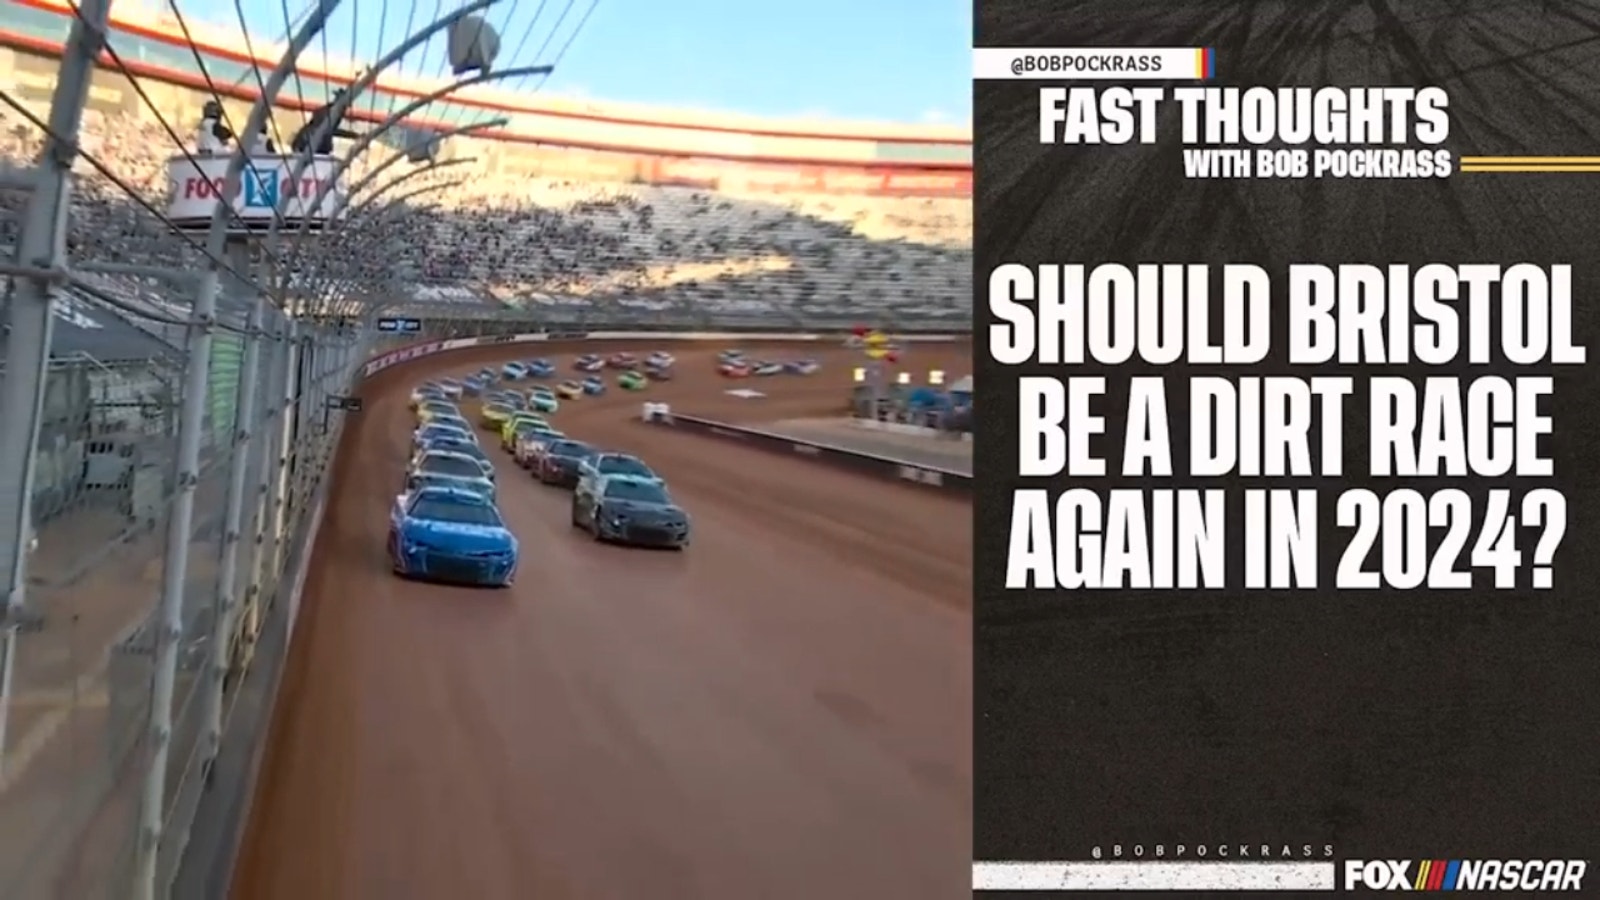 Fast Thoughts: Should Bristol be a dirt race in 2024?